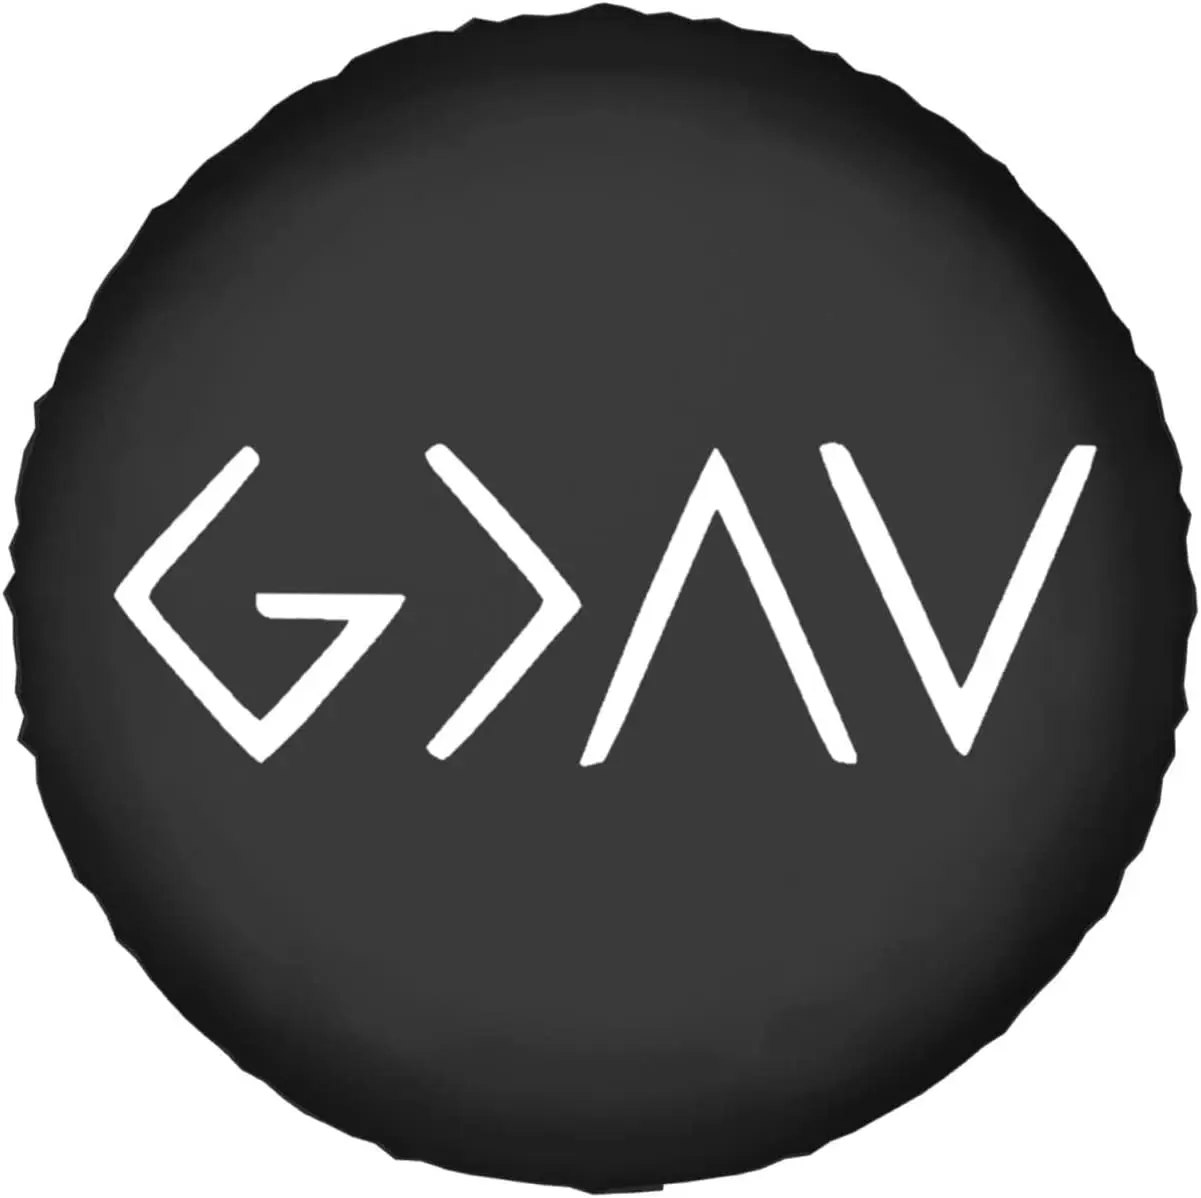 

God is Greater Than The Highs and Lows Universal Tire Cover Fits Most Vehicles Such As Trailers, RVs, SUV, Trucks